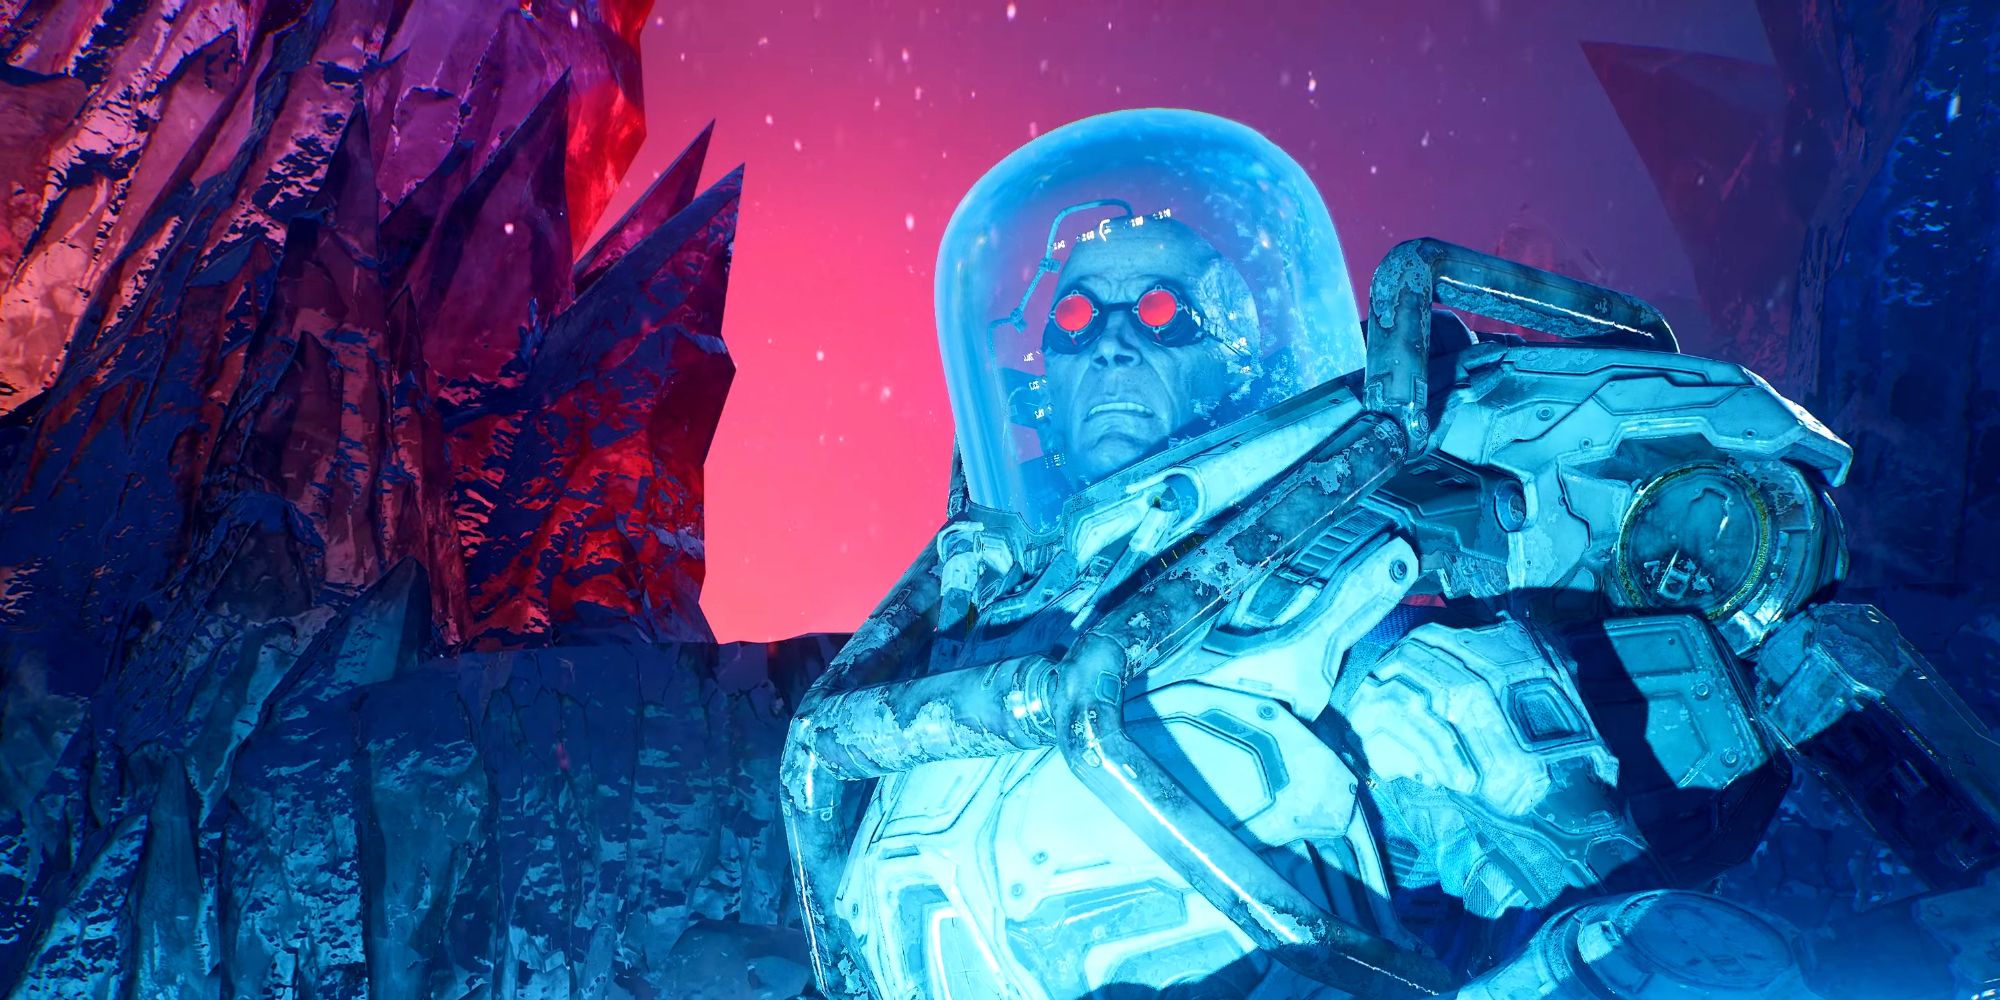 Mr. Freeze surrounded by his icy fortress in Gotham Knights.